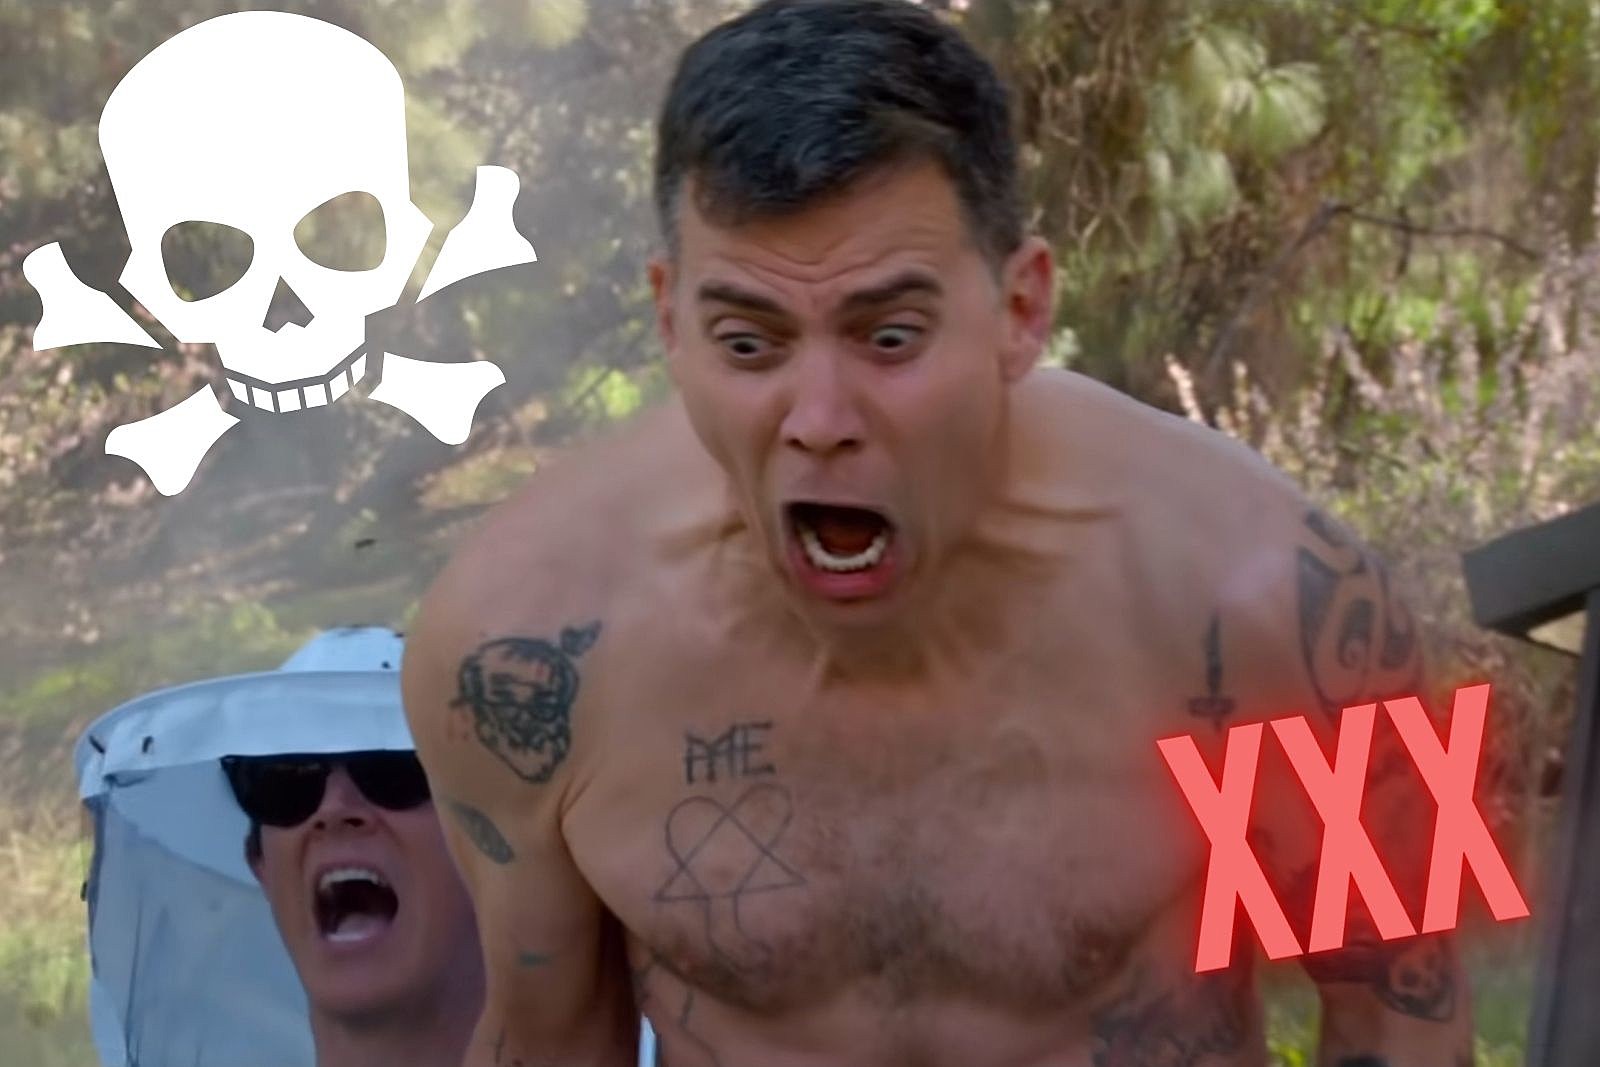 Steve-O of Jackass Fame Adds Maine Stop To XXX-Rated Comedy Tour